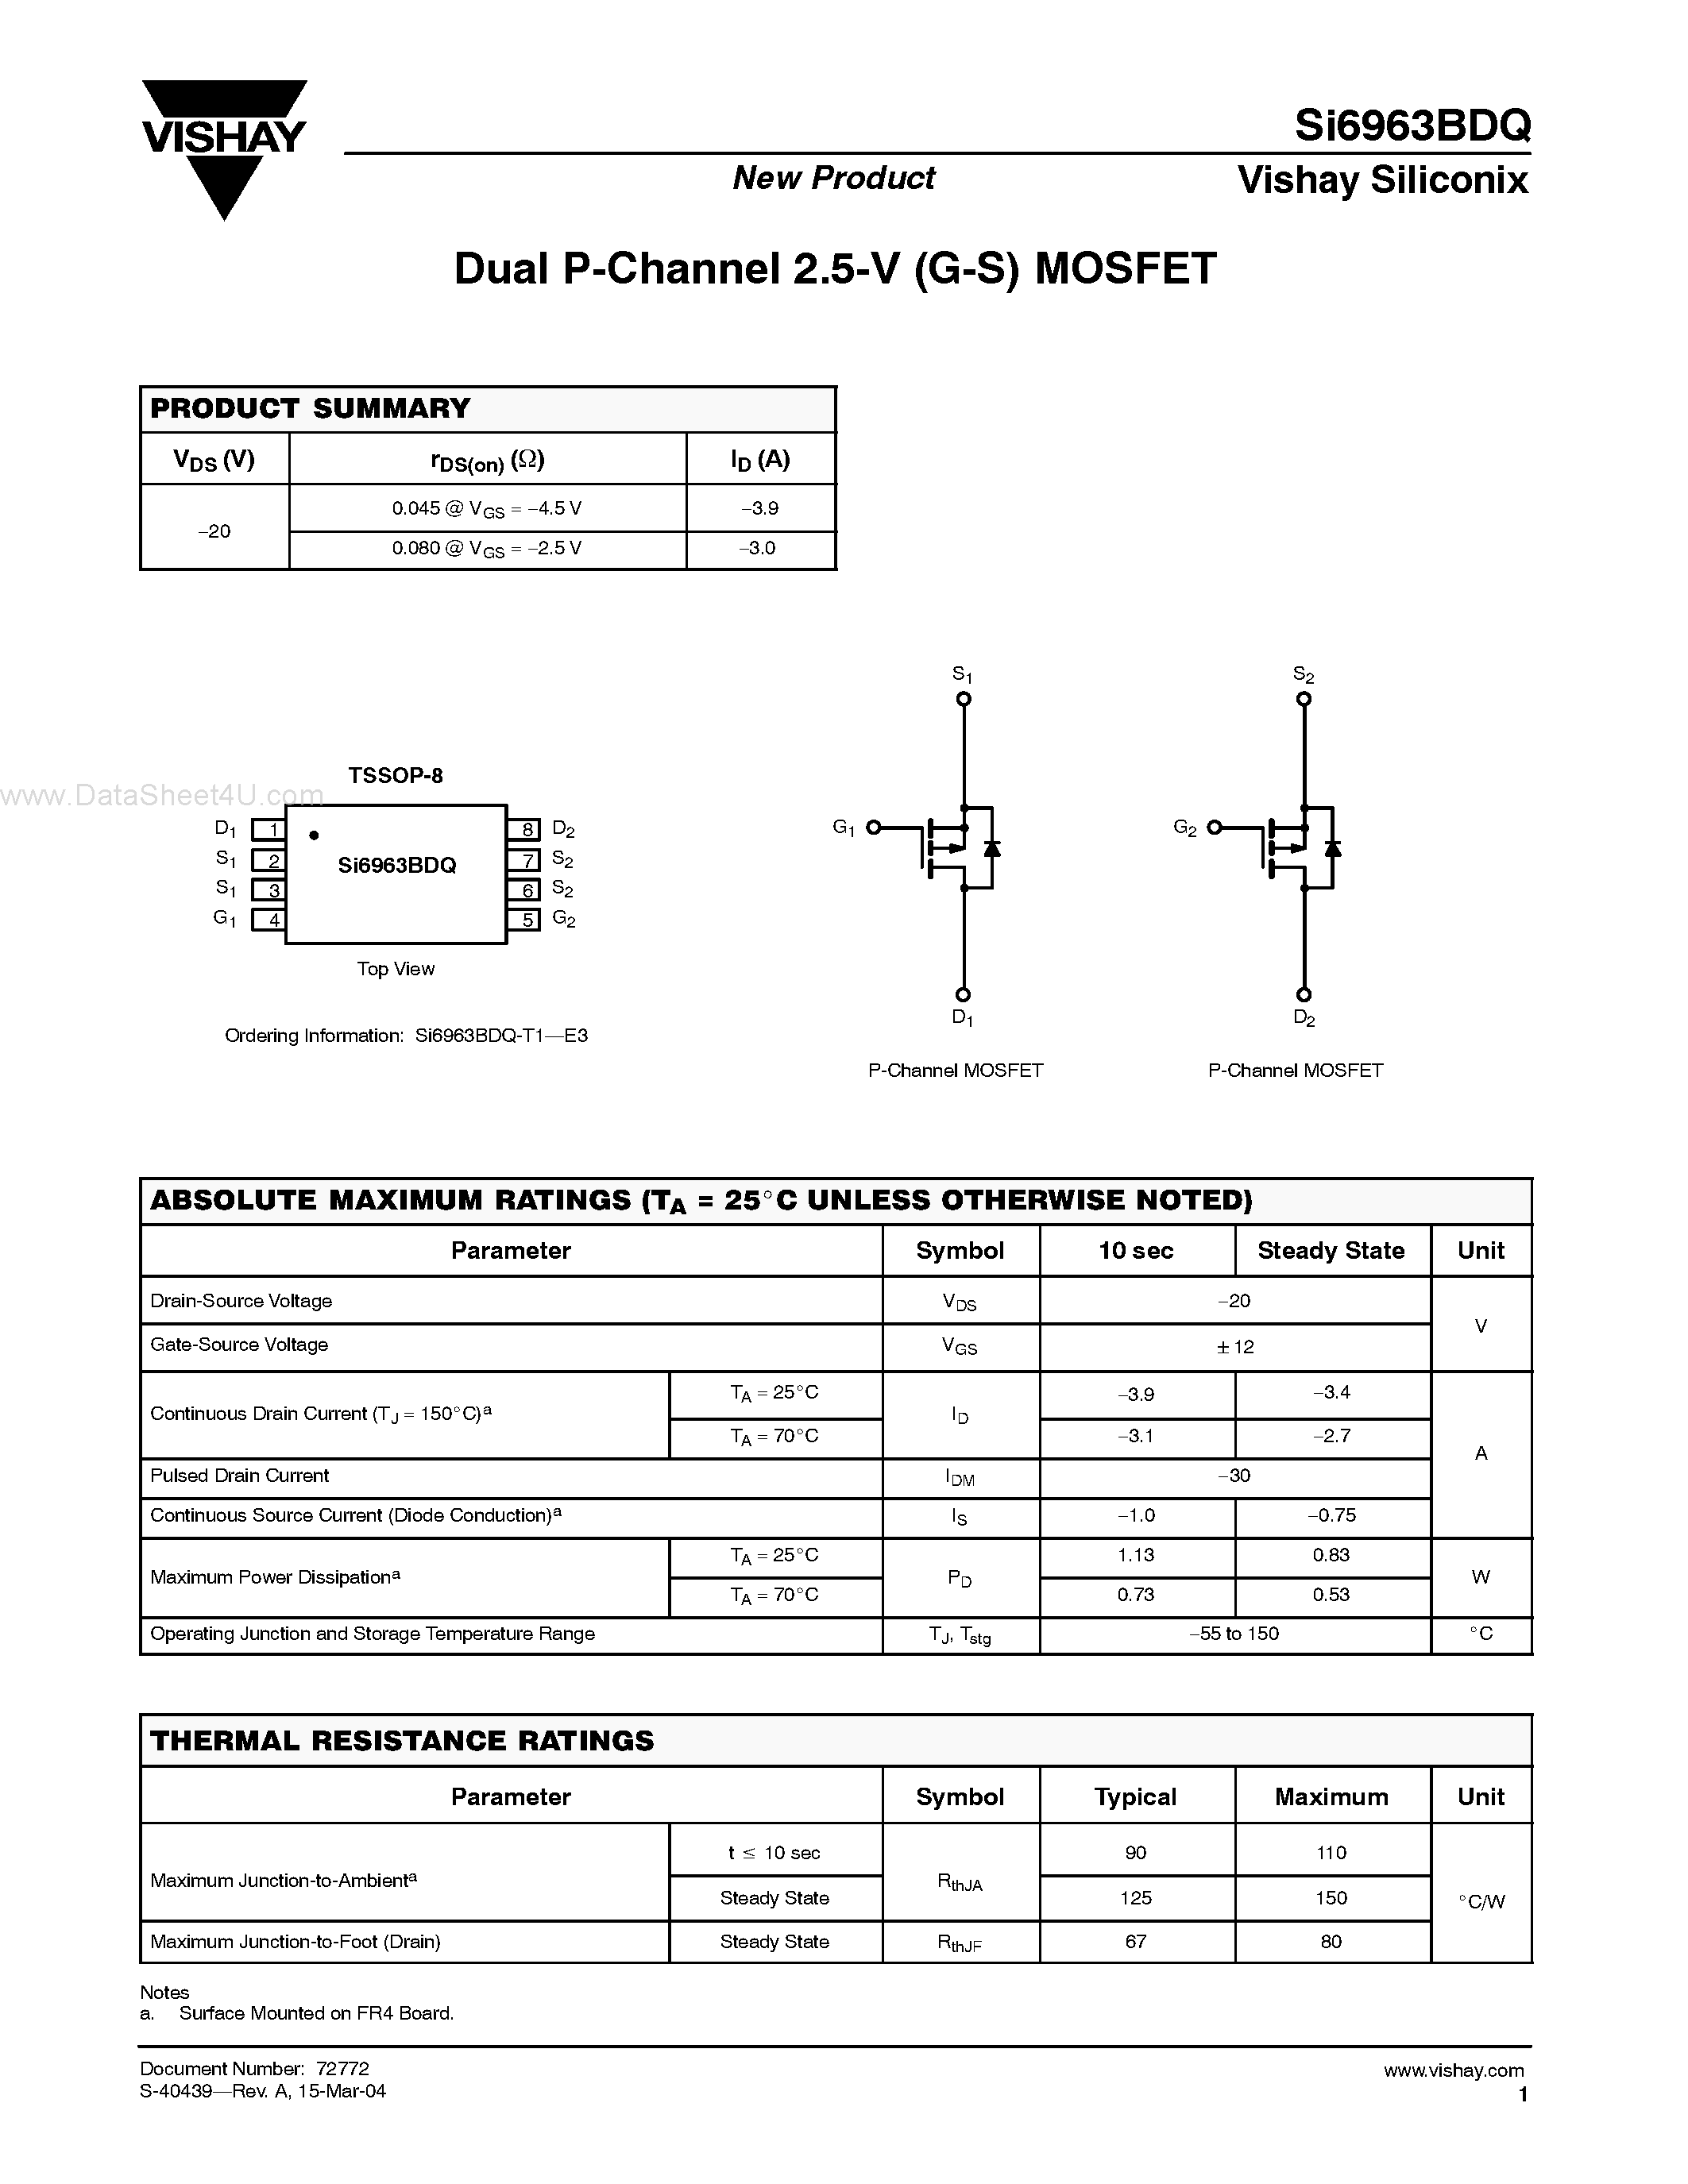 Datasheet SI6963BDQ - Dual P-Channel 2.5-V (G-S) MOSFET page 1